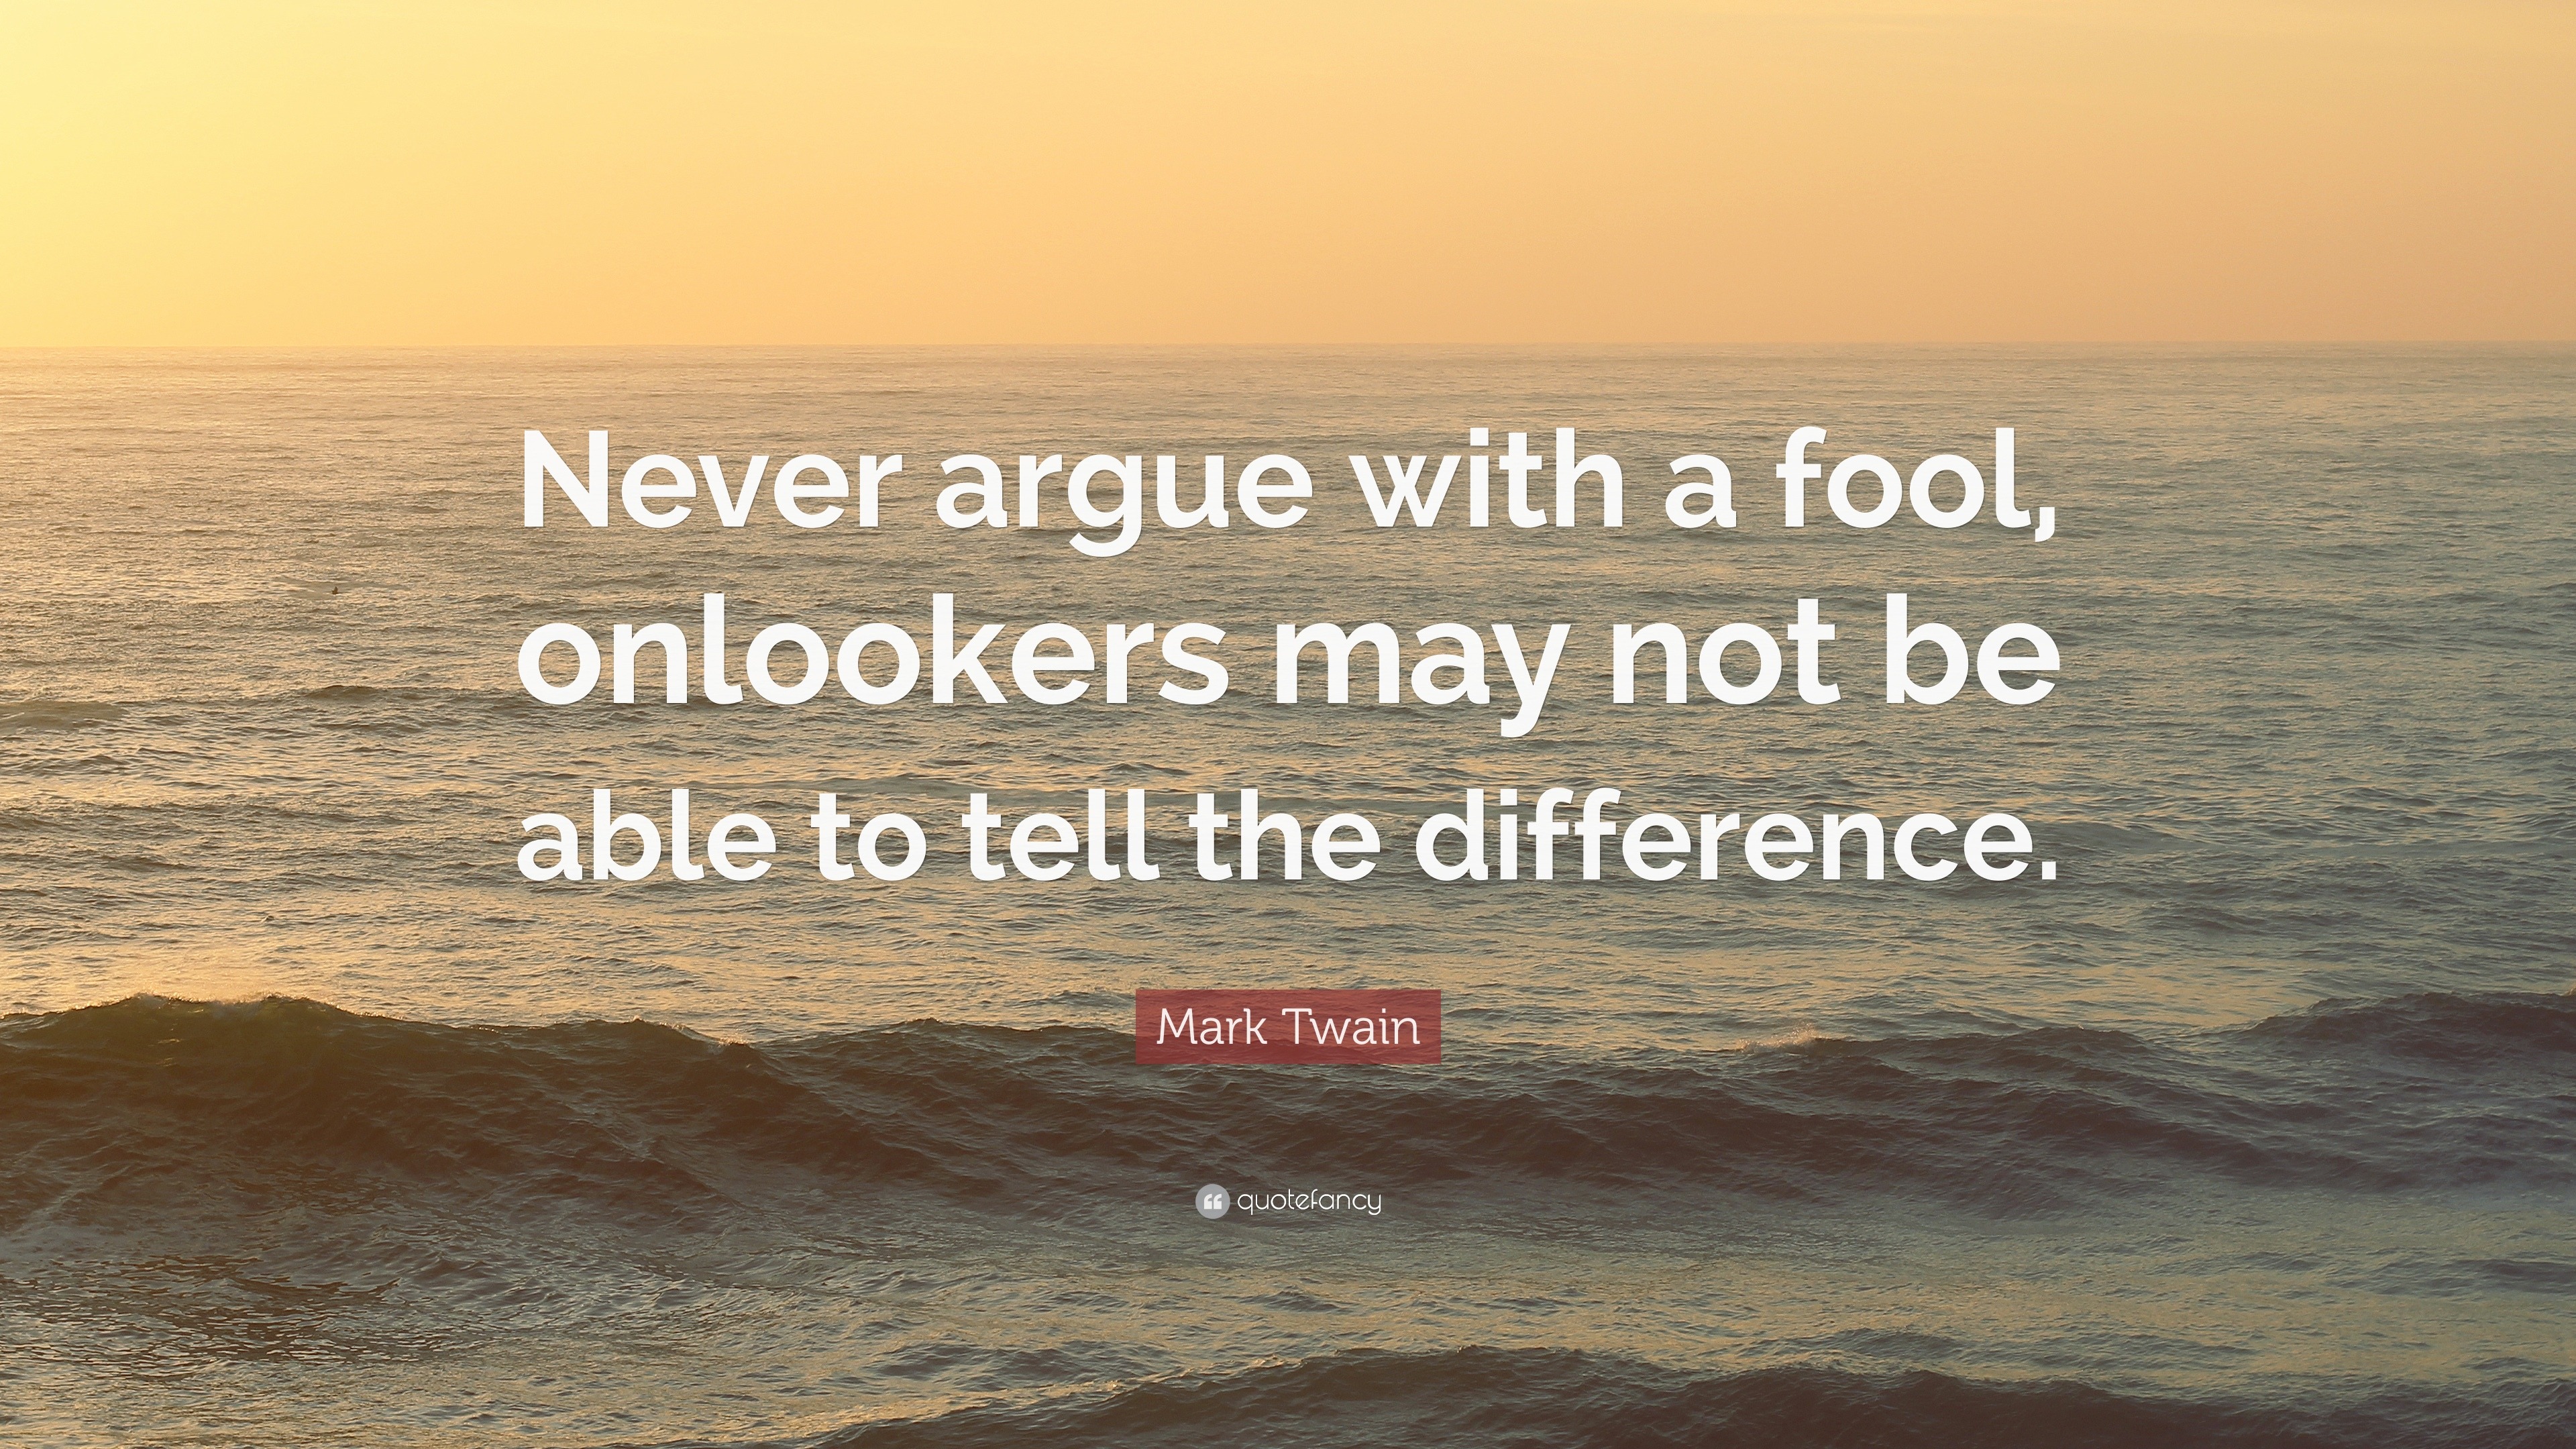 Mark Twain Quote “Never argue with a fool, onlookers may not be able